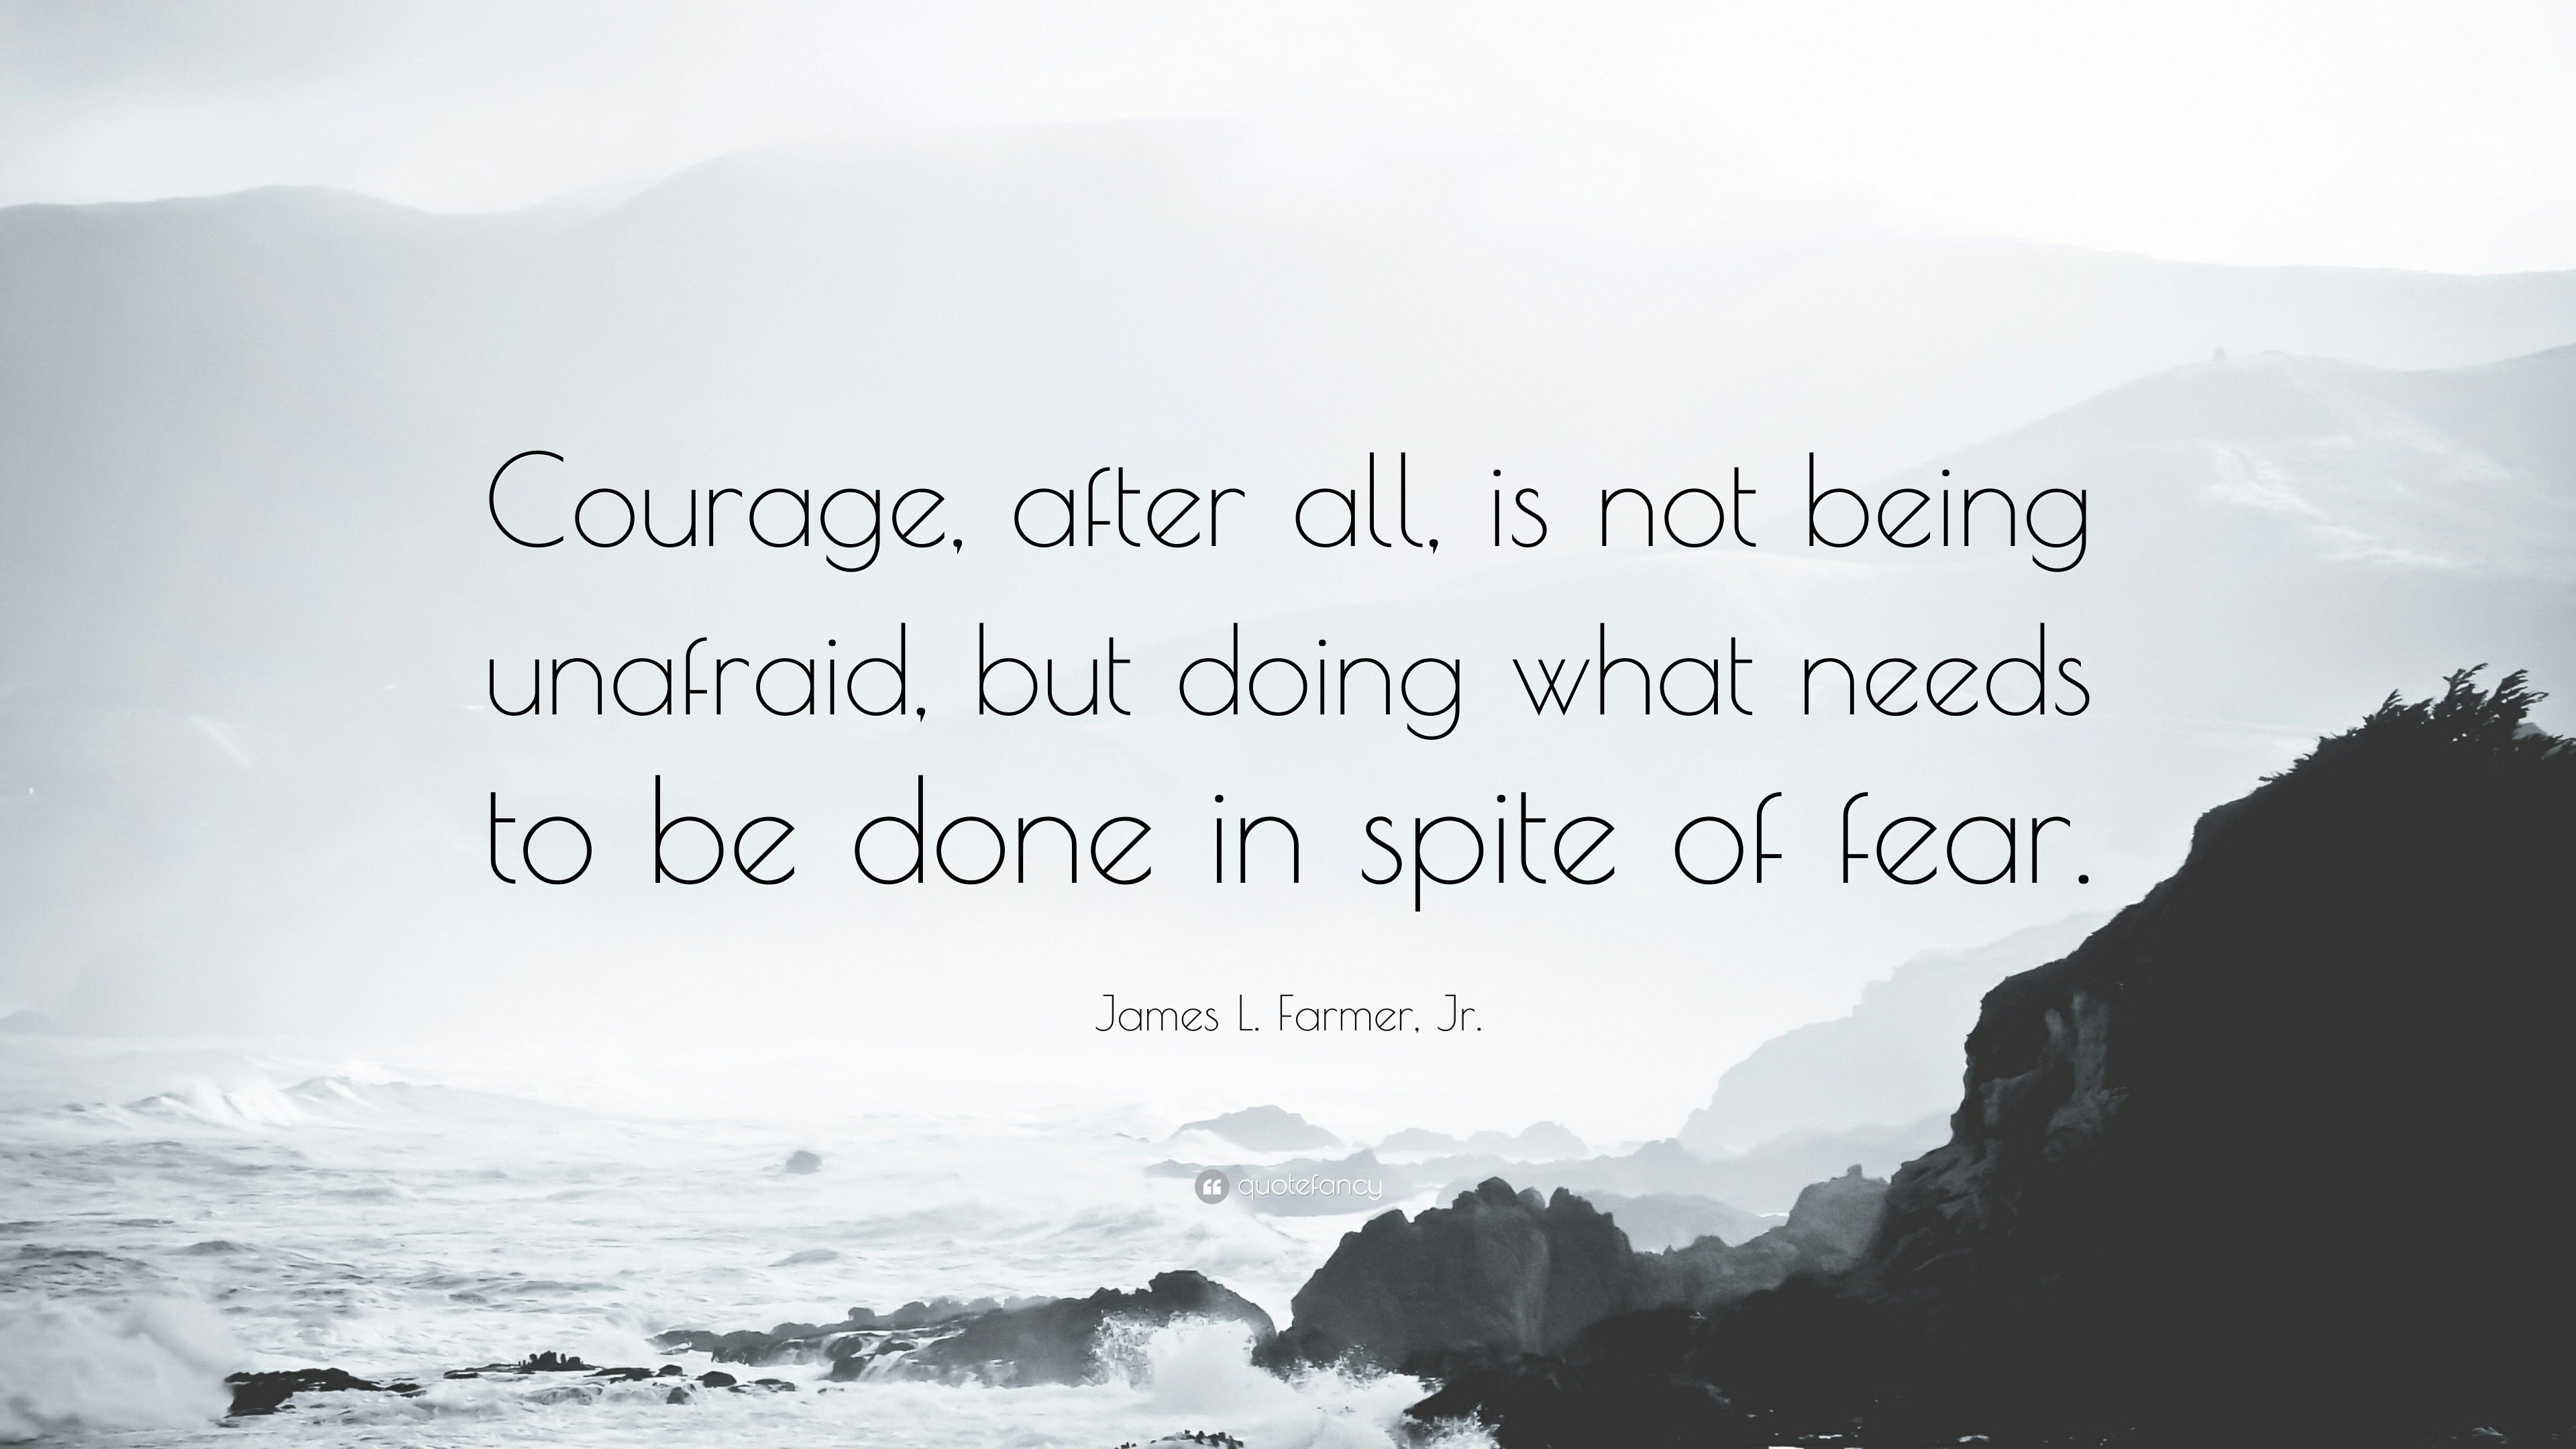 James L. Farmer, Jr. Quote: “Courage, after all, is not being unafraid ...